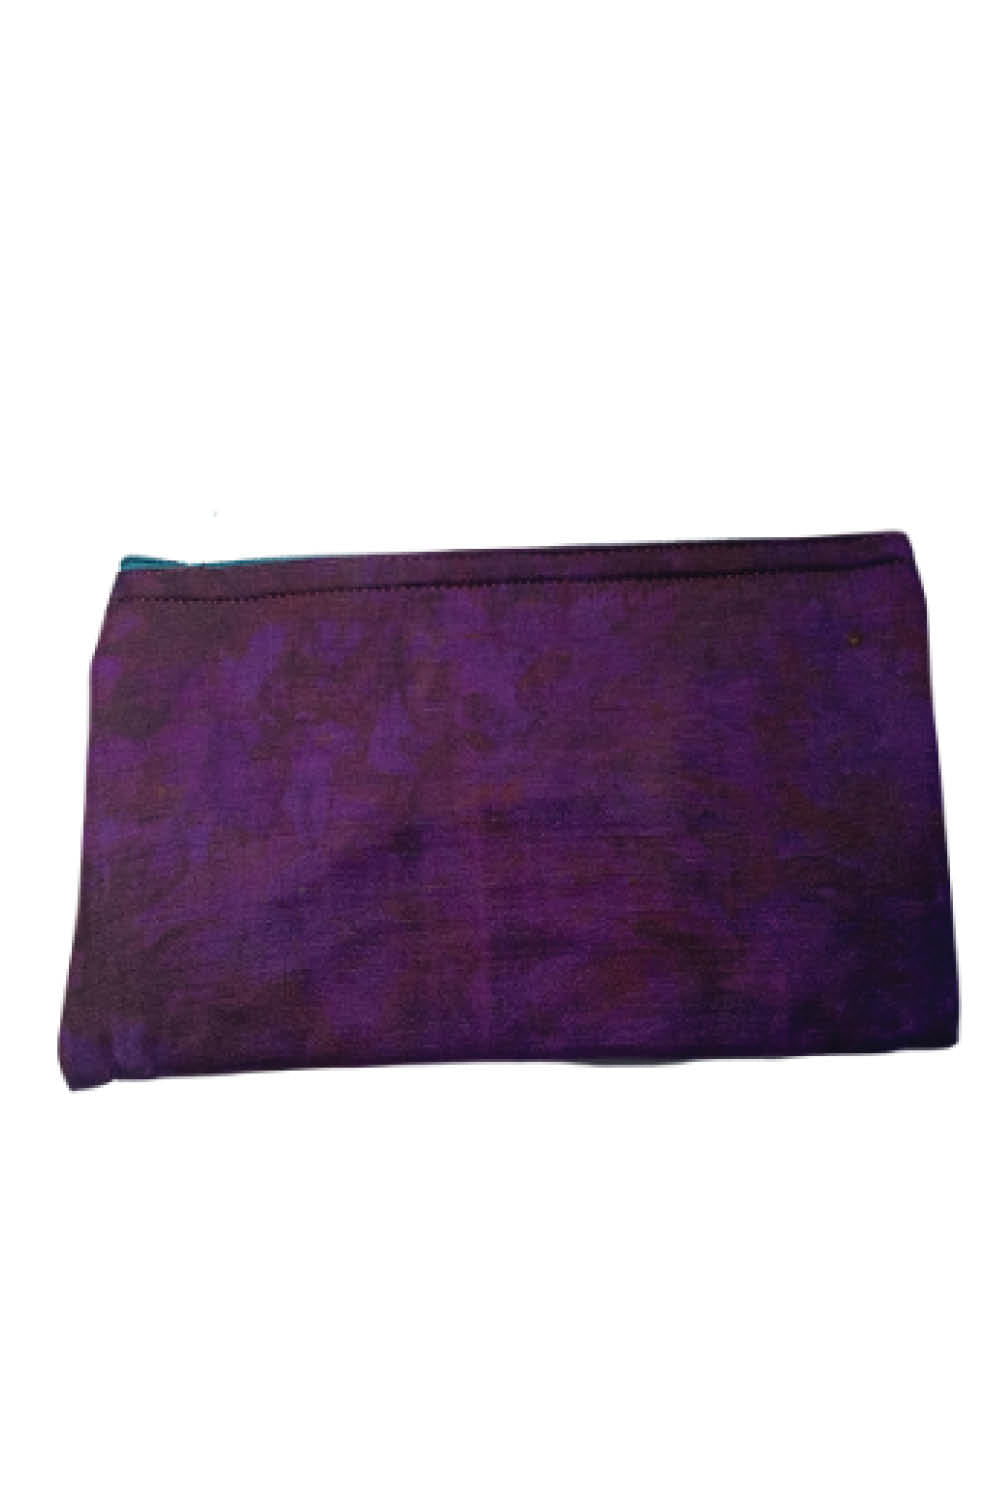 Silk Pouches with purples and rust tones with aqua zipper